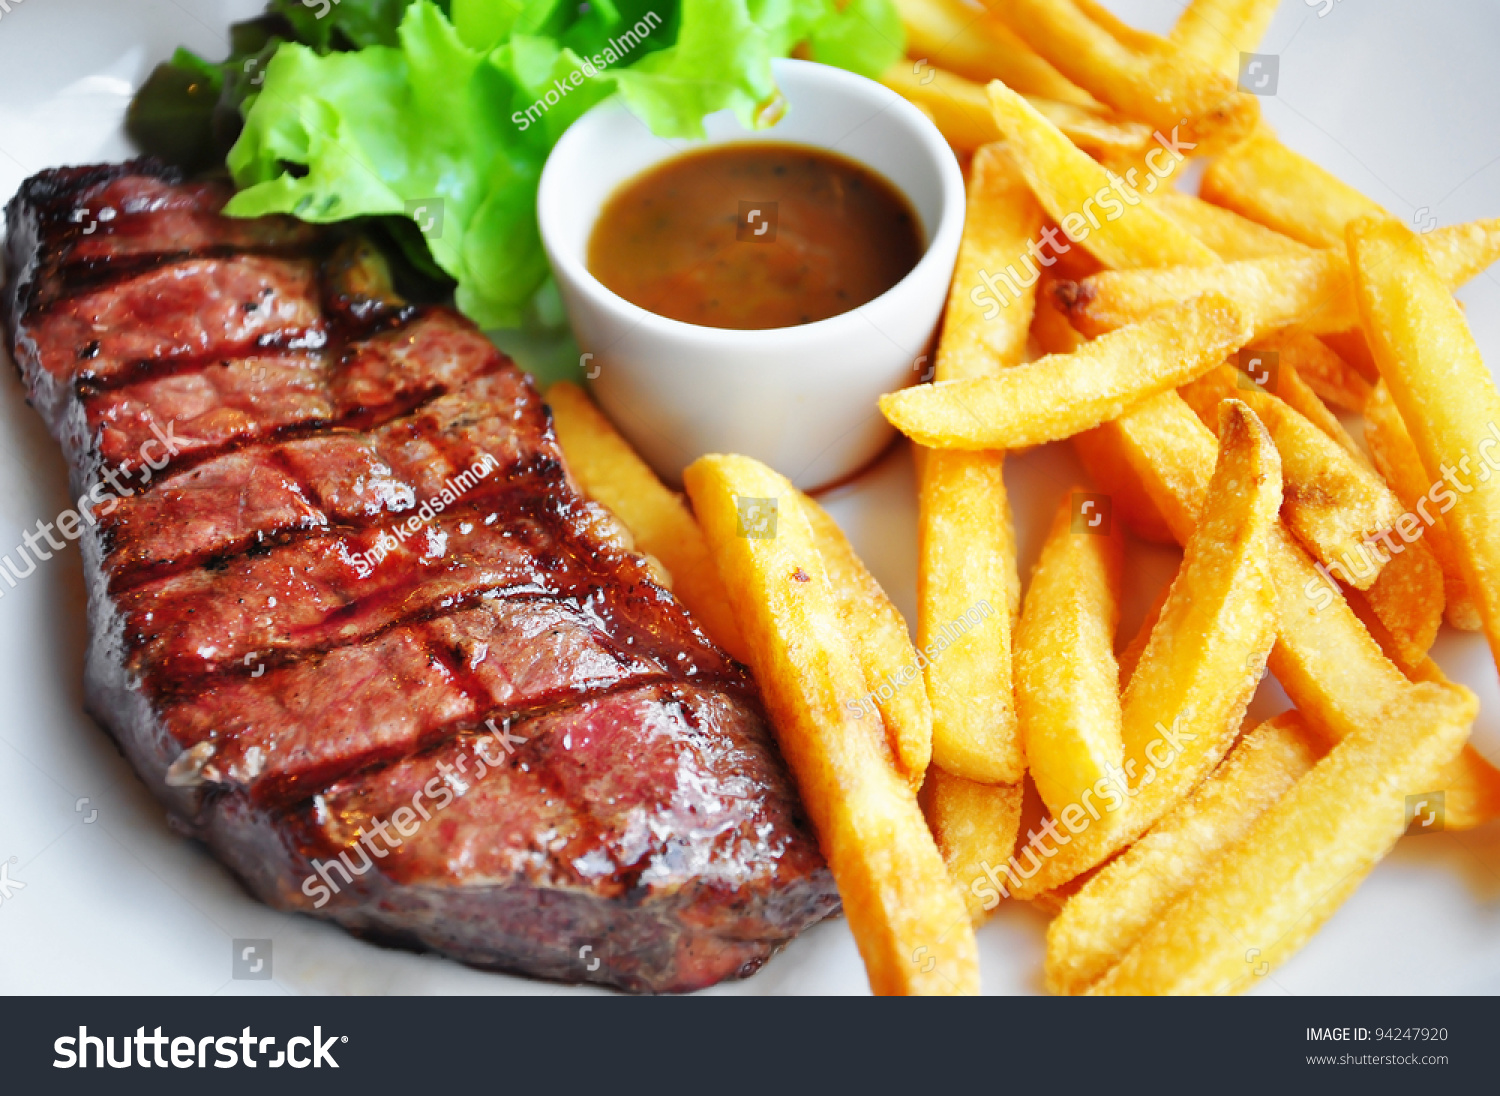 stock-photo-beef-steak-and-chips-9424792